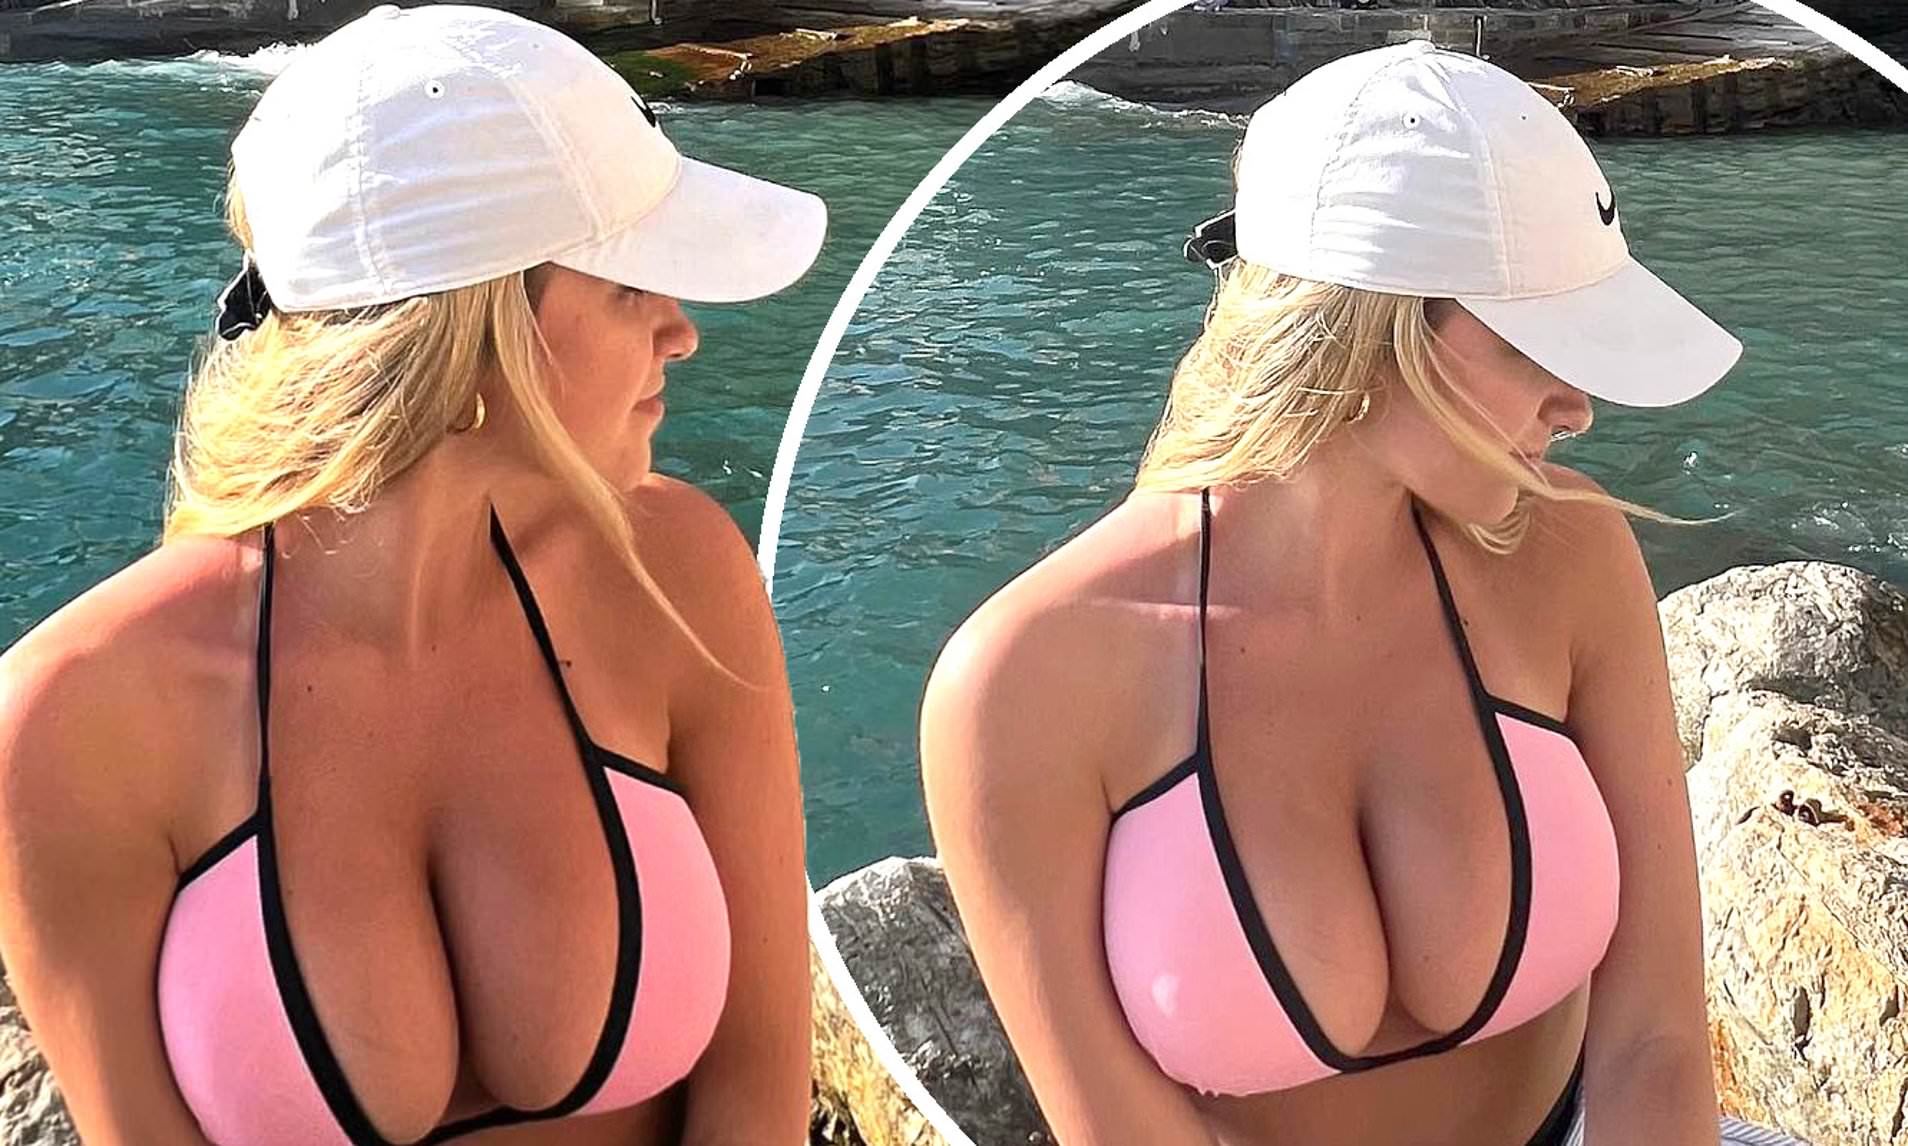 adele hodgkinson recommends huge tits in bekiny pic